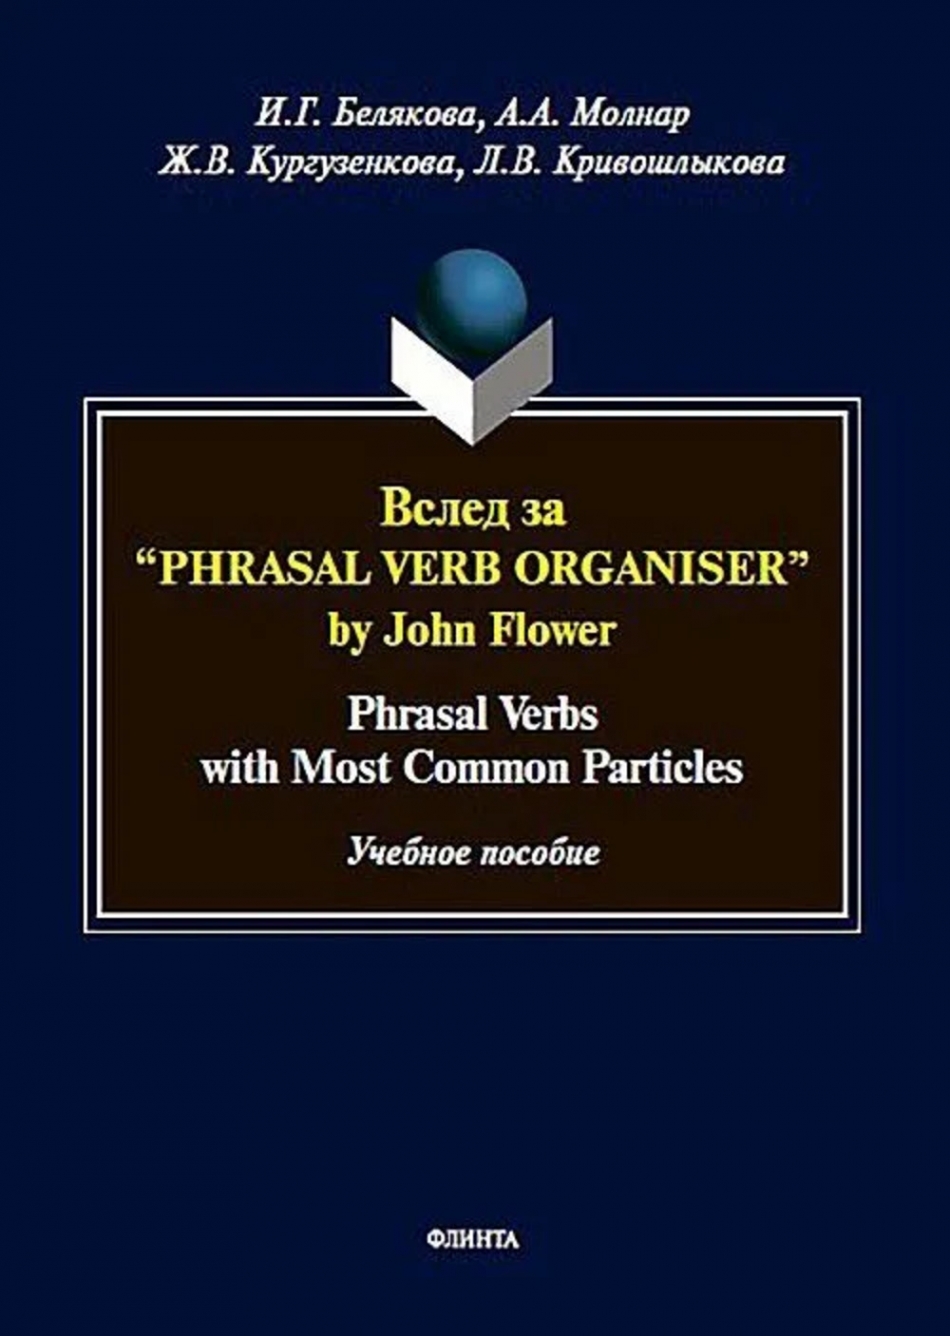  ..,  ..,  ..,  ..   Phrasal Verb Organiser by John Flower: Phrasal Verbs with Different Particles : .  